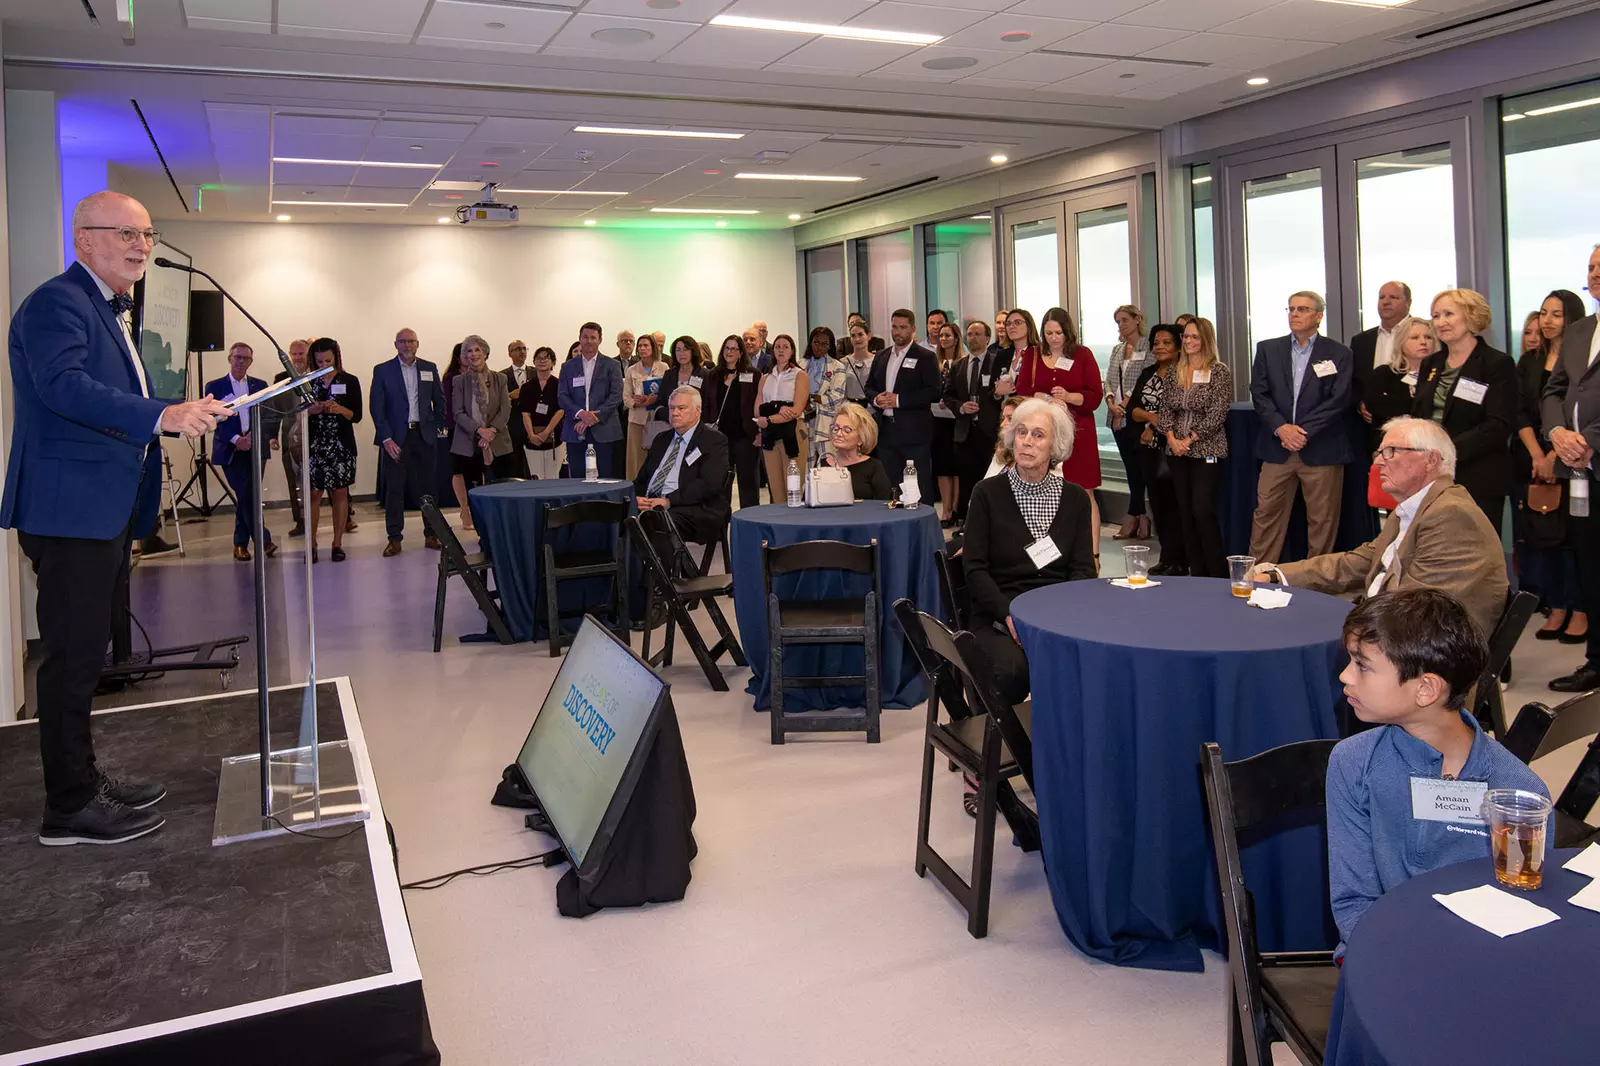 AdventHealth staff and the community celebrate the 10-year anniversary of the Translational Research Institute at the recently opened Innovation Tower.